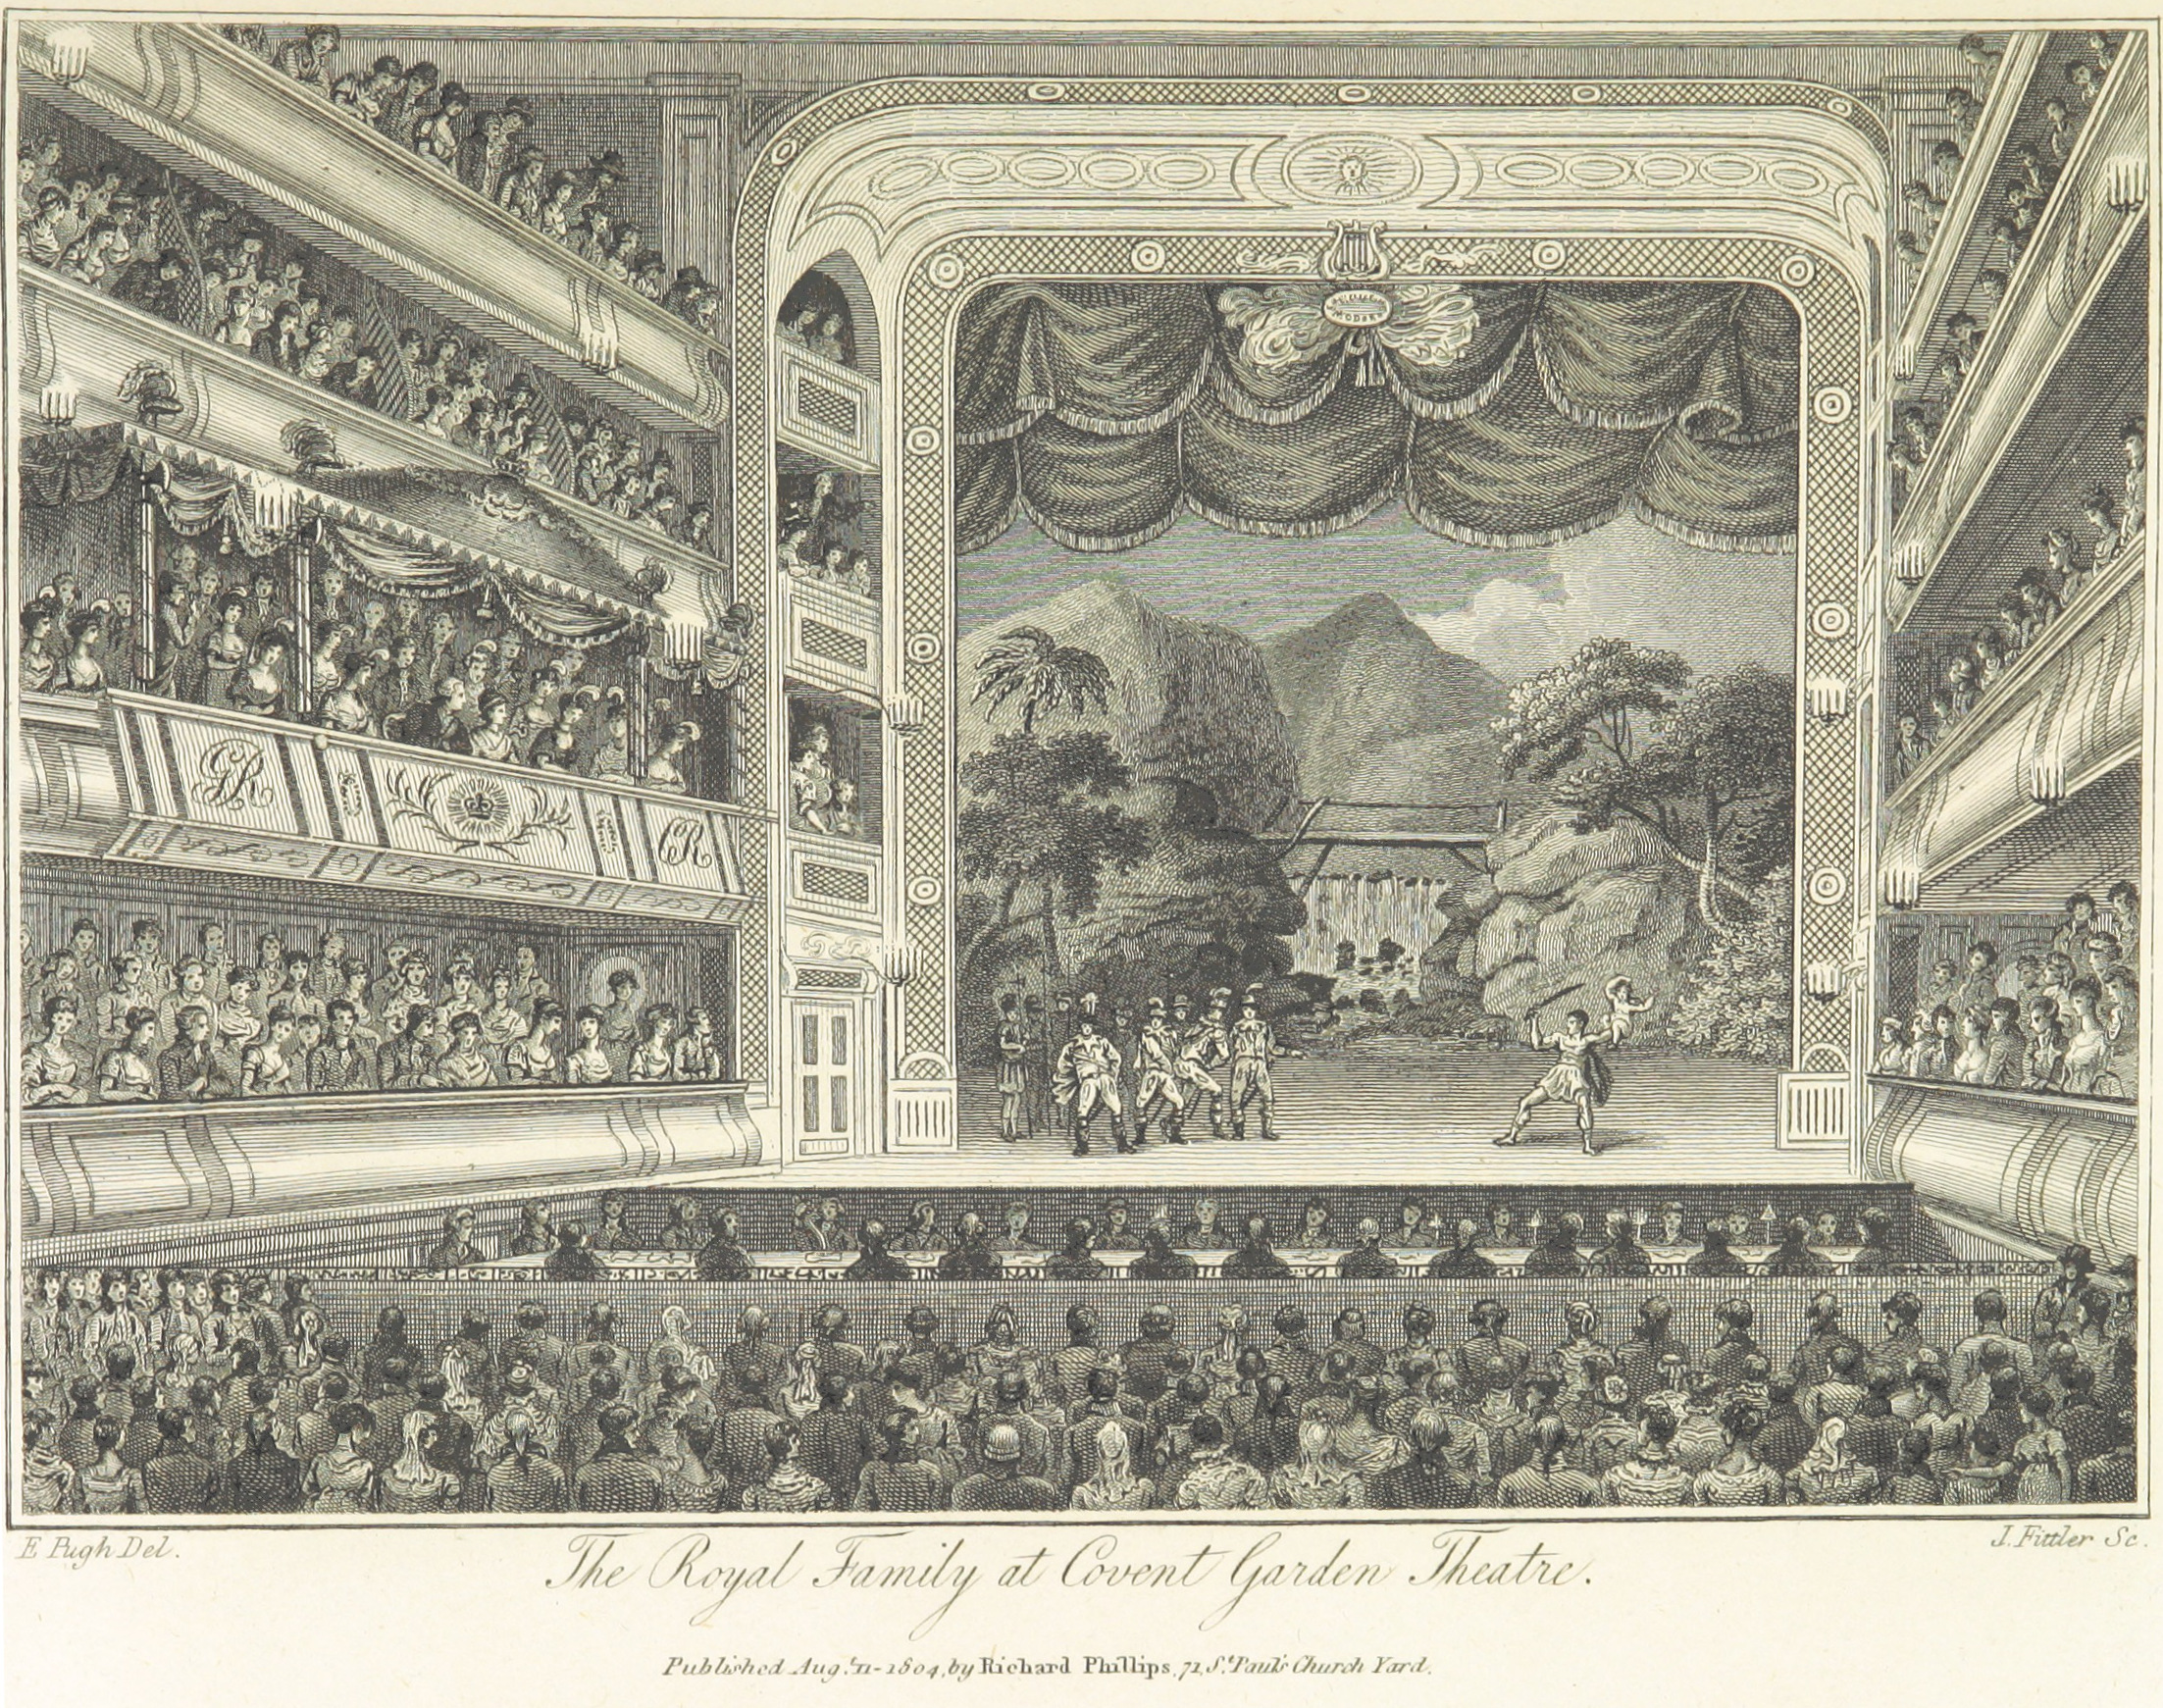 Phillips(1804)_p497_-_The_Royal_Family_at_Covent_Garden_Theatre